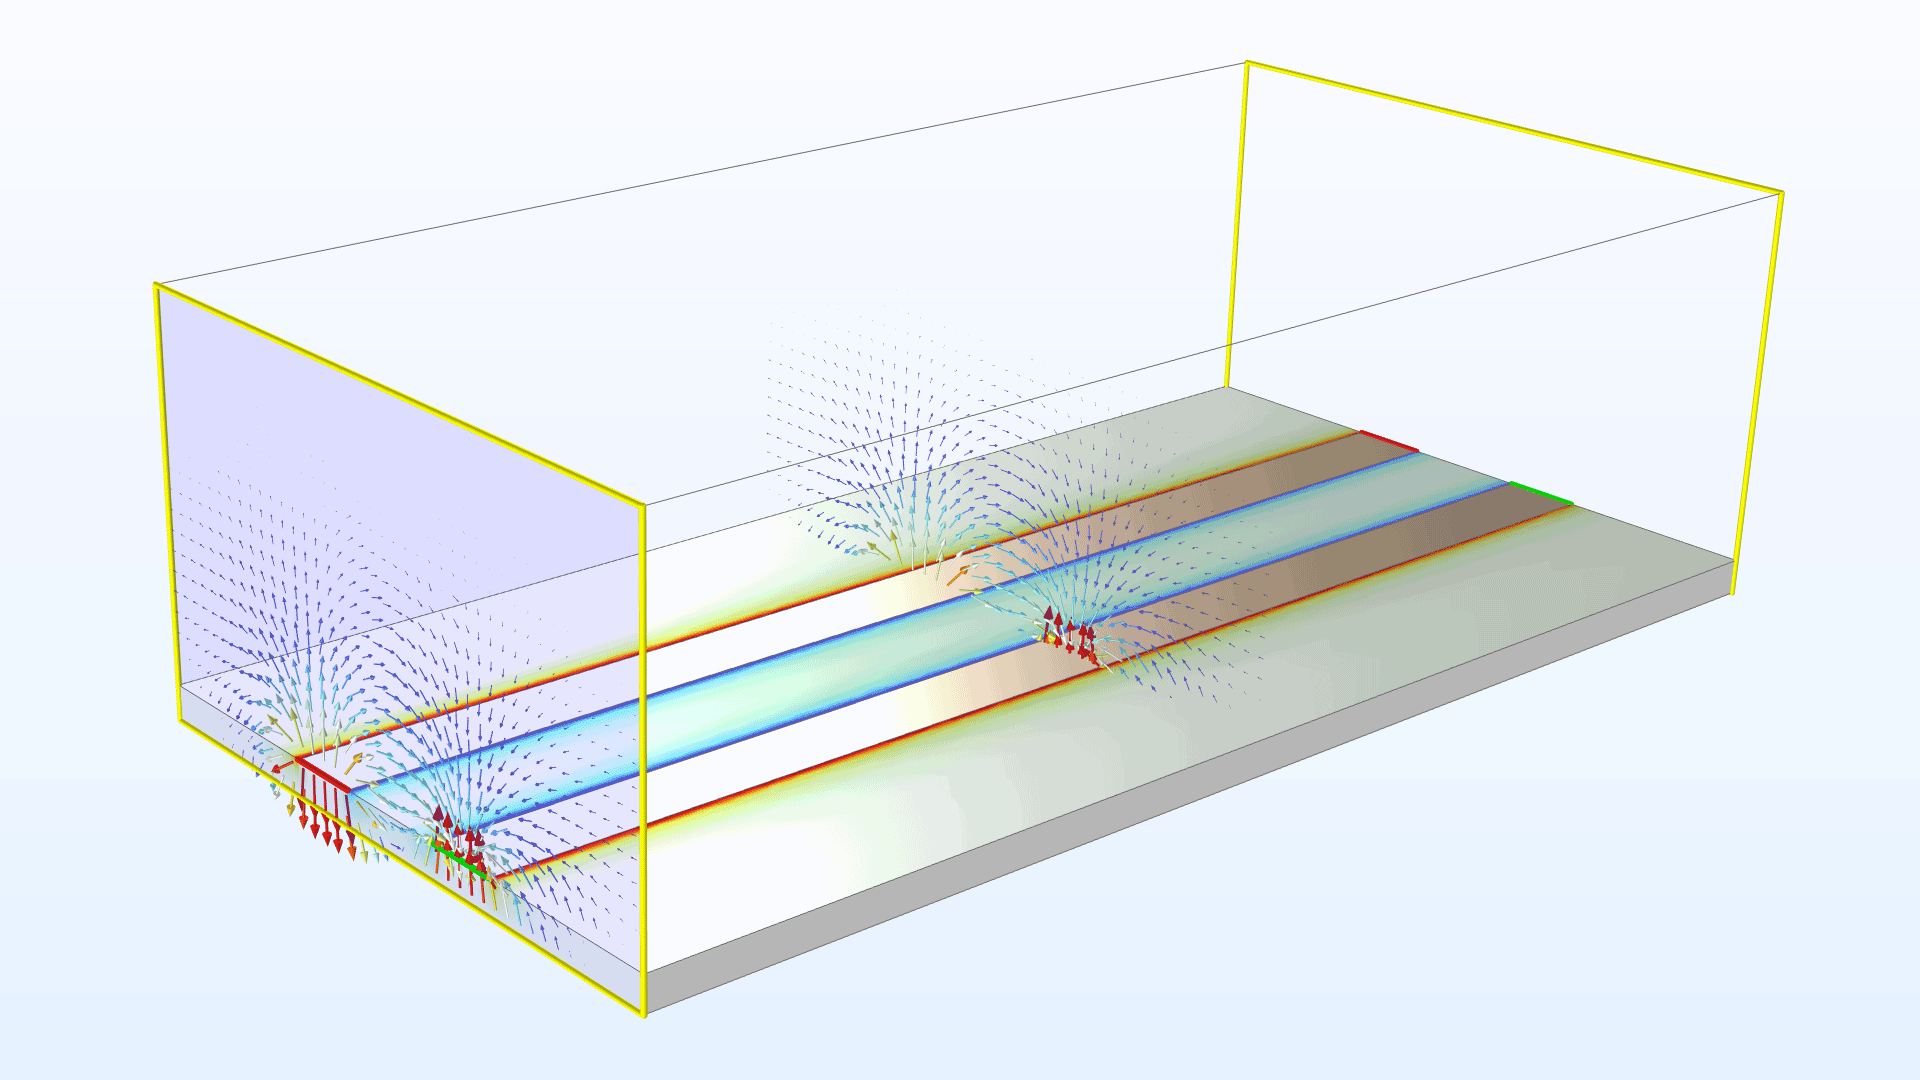 A differential microstrip line model showing the electric field distribution in the Rainbow Light color table.